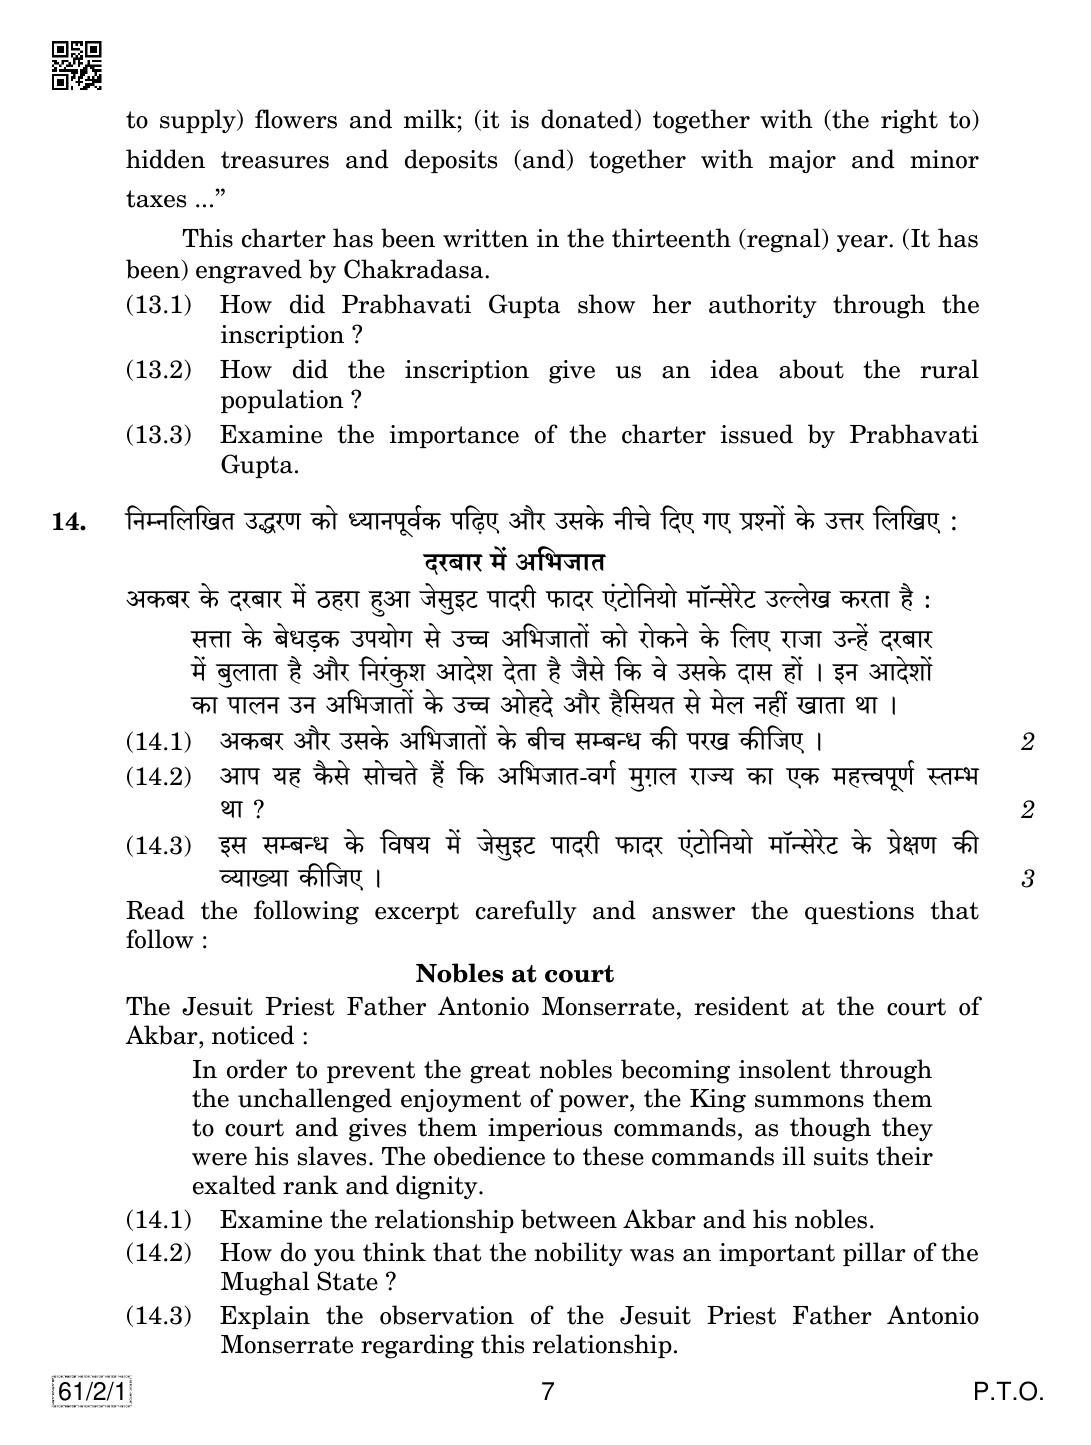 CBSE Class 12 61-2-1 History 2019 Question Paper - Page 7